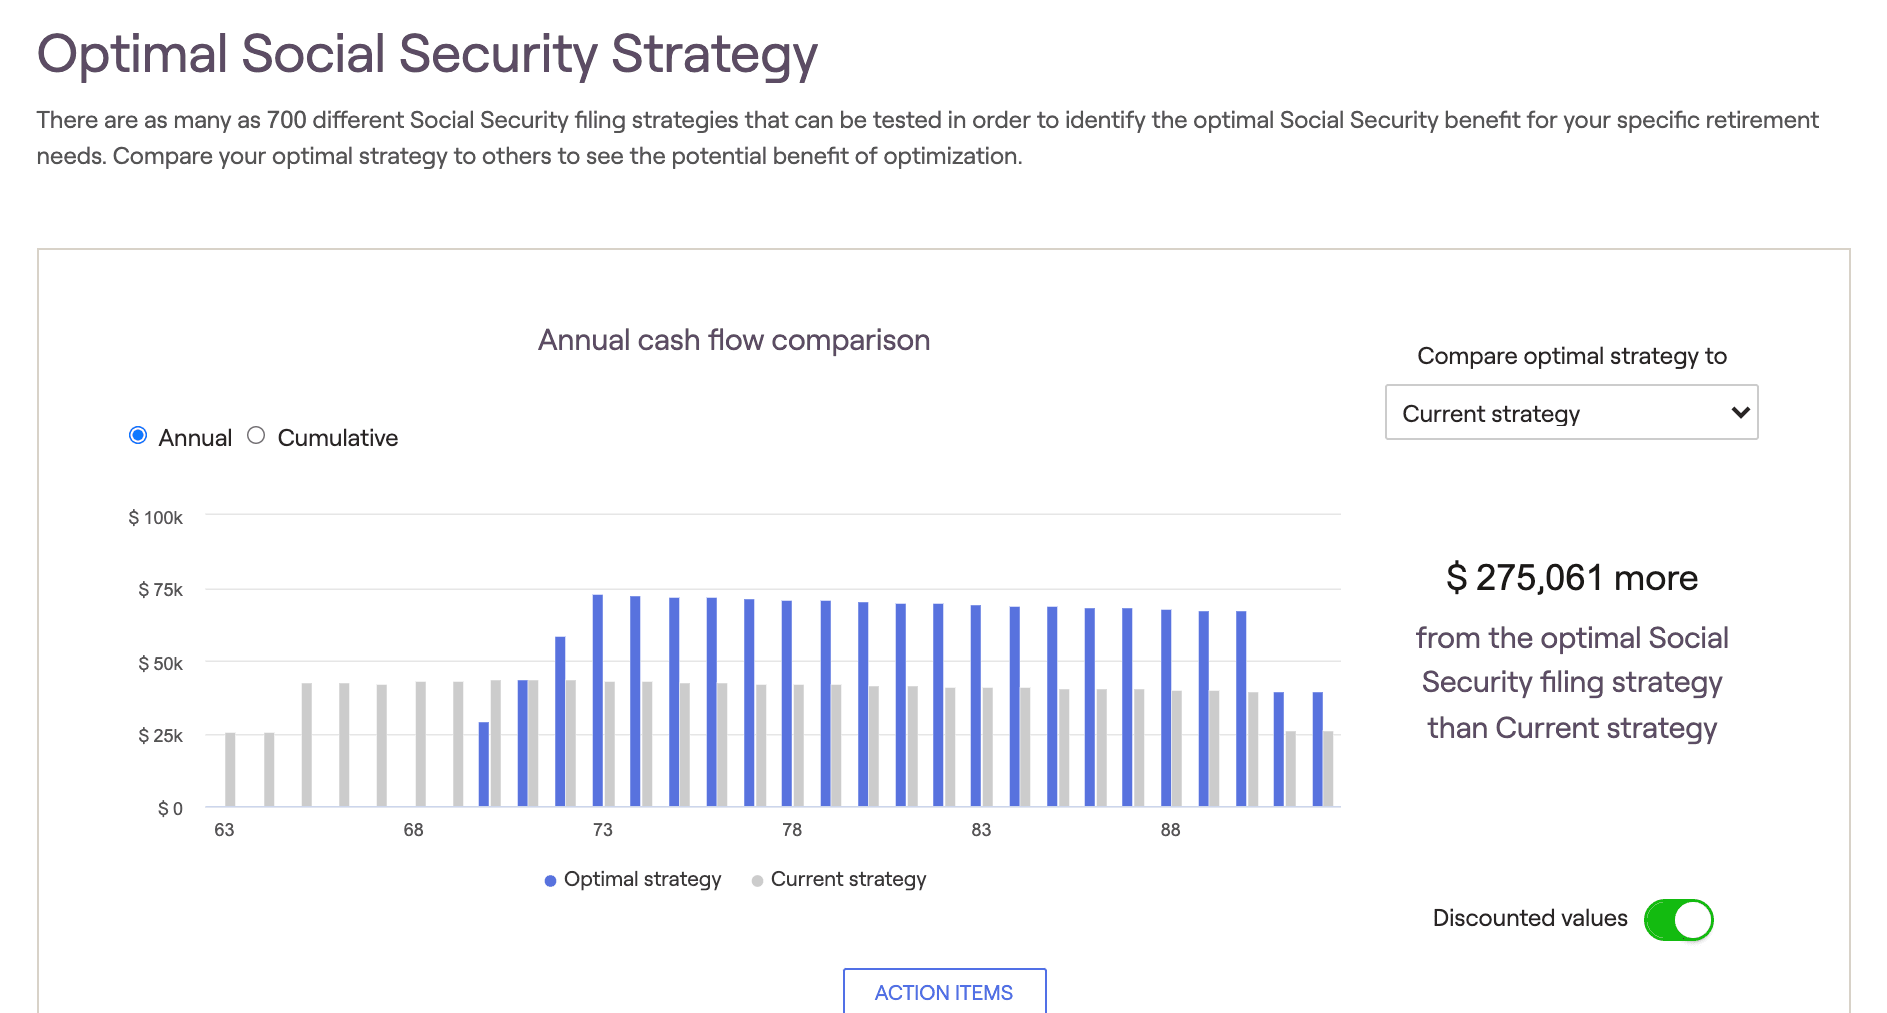 Optimal Social Security Strategy screenshot from RightCapital platform